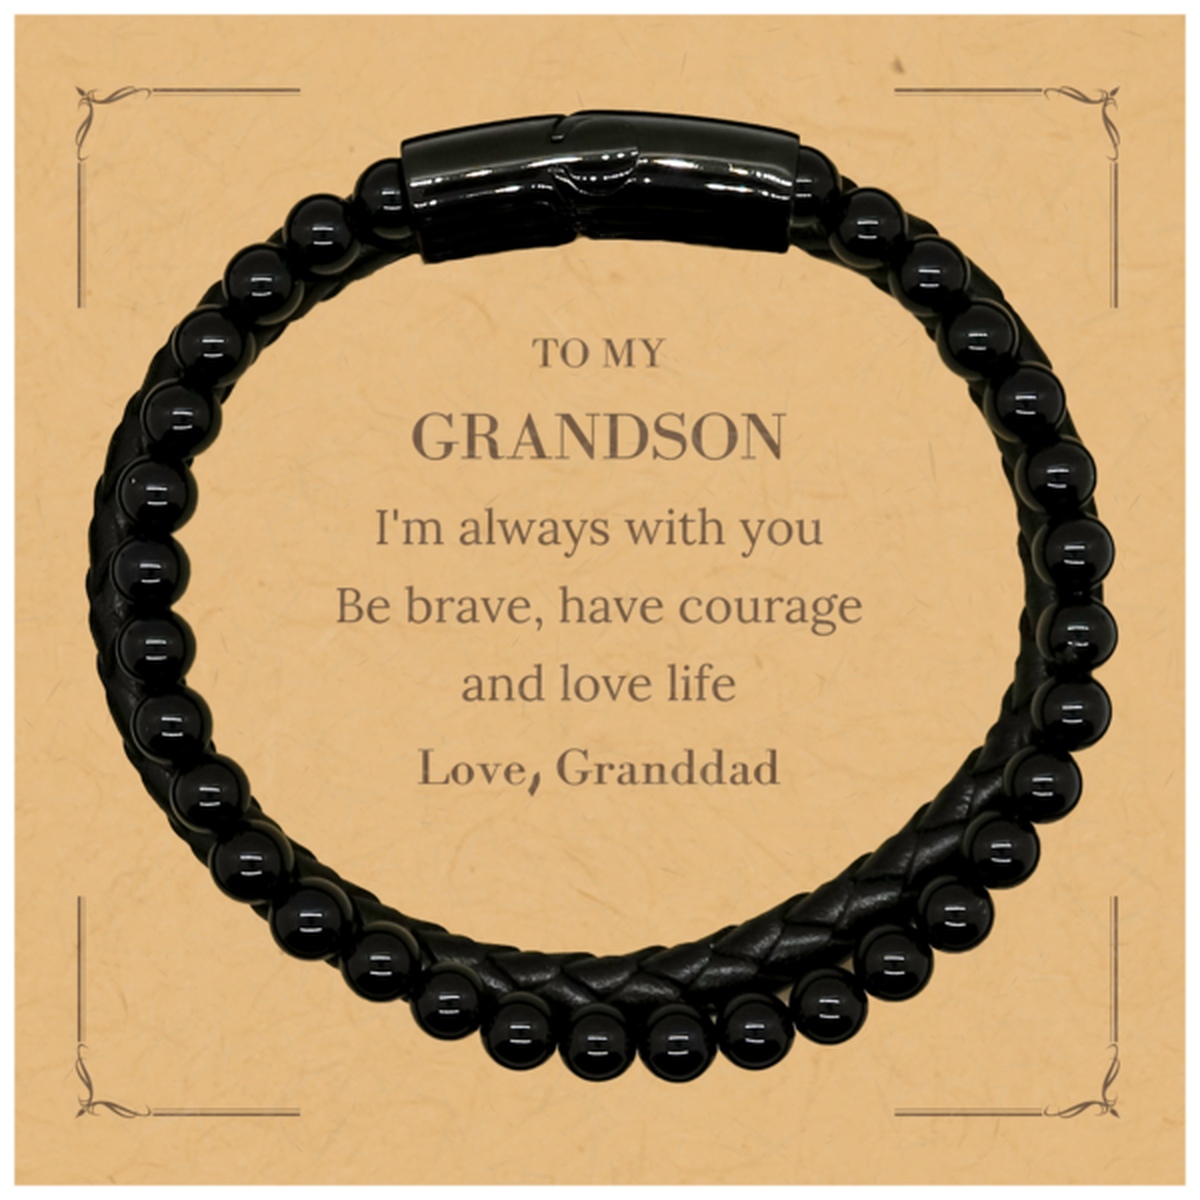 To My Grandson Gifts from Granddad, Unique Stone Leather Bracelets Inspirational Christmas Birthday Graduation Gifts for Grandson I'm always with you. Be brave, have courage and love life. Love, Granddad